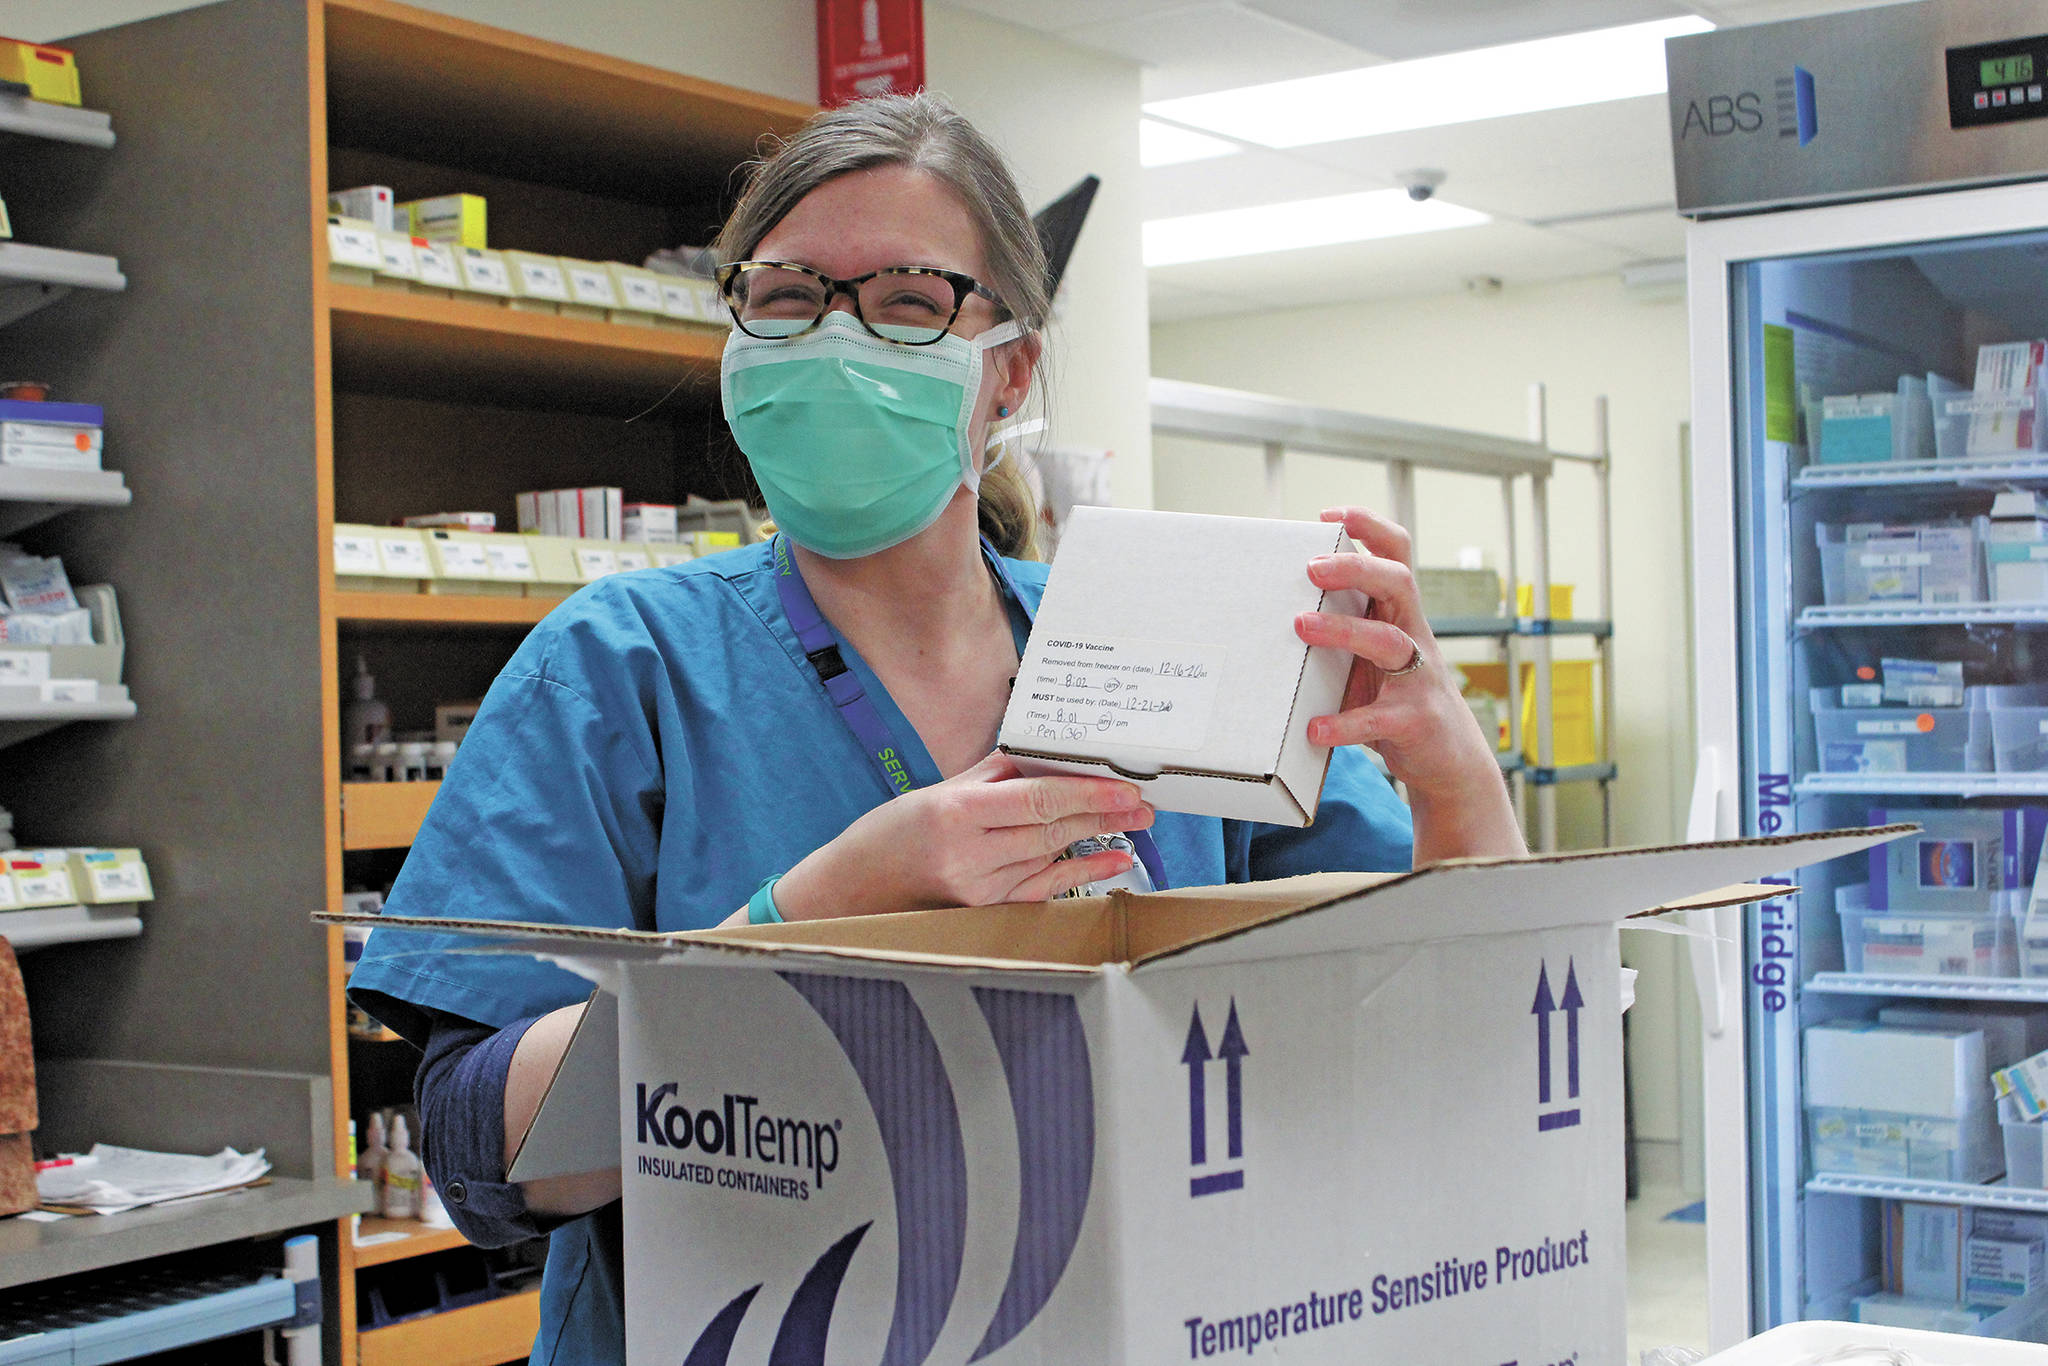 South Peninsula Pharmacist Jill Kort unpacks the Pfizer vaccine for COVID-19 shortly after it arrived at the hospital on Wednesday, Dec. 16, 2020 in Homer, Alaska. (Photo by Megan Pacer/Homer News)